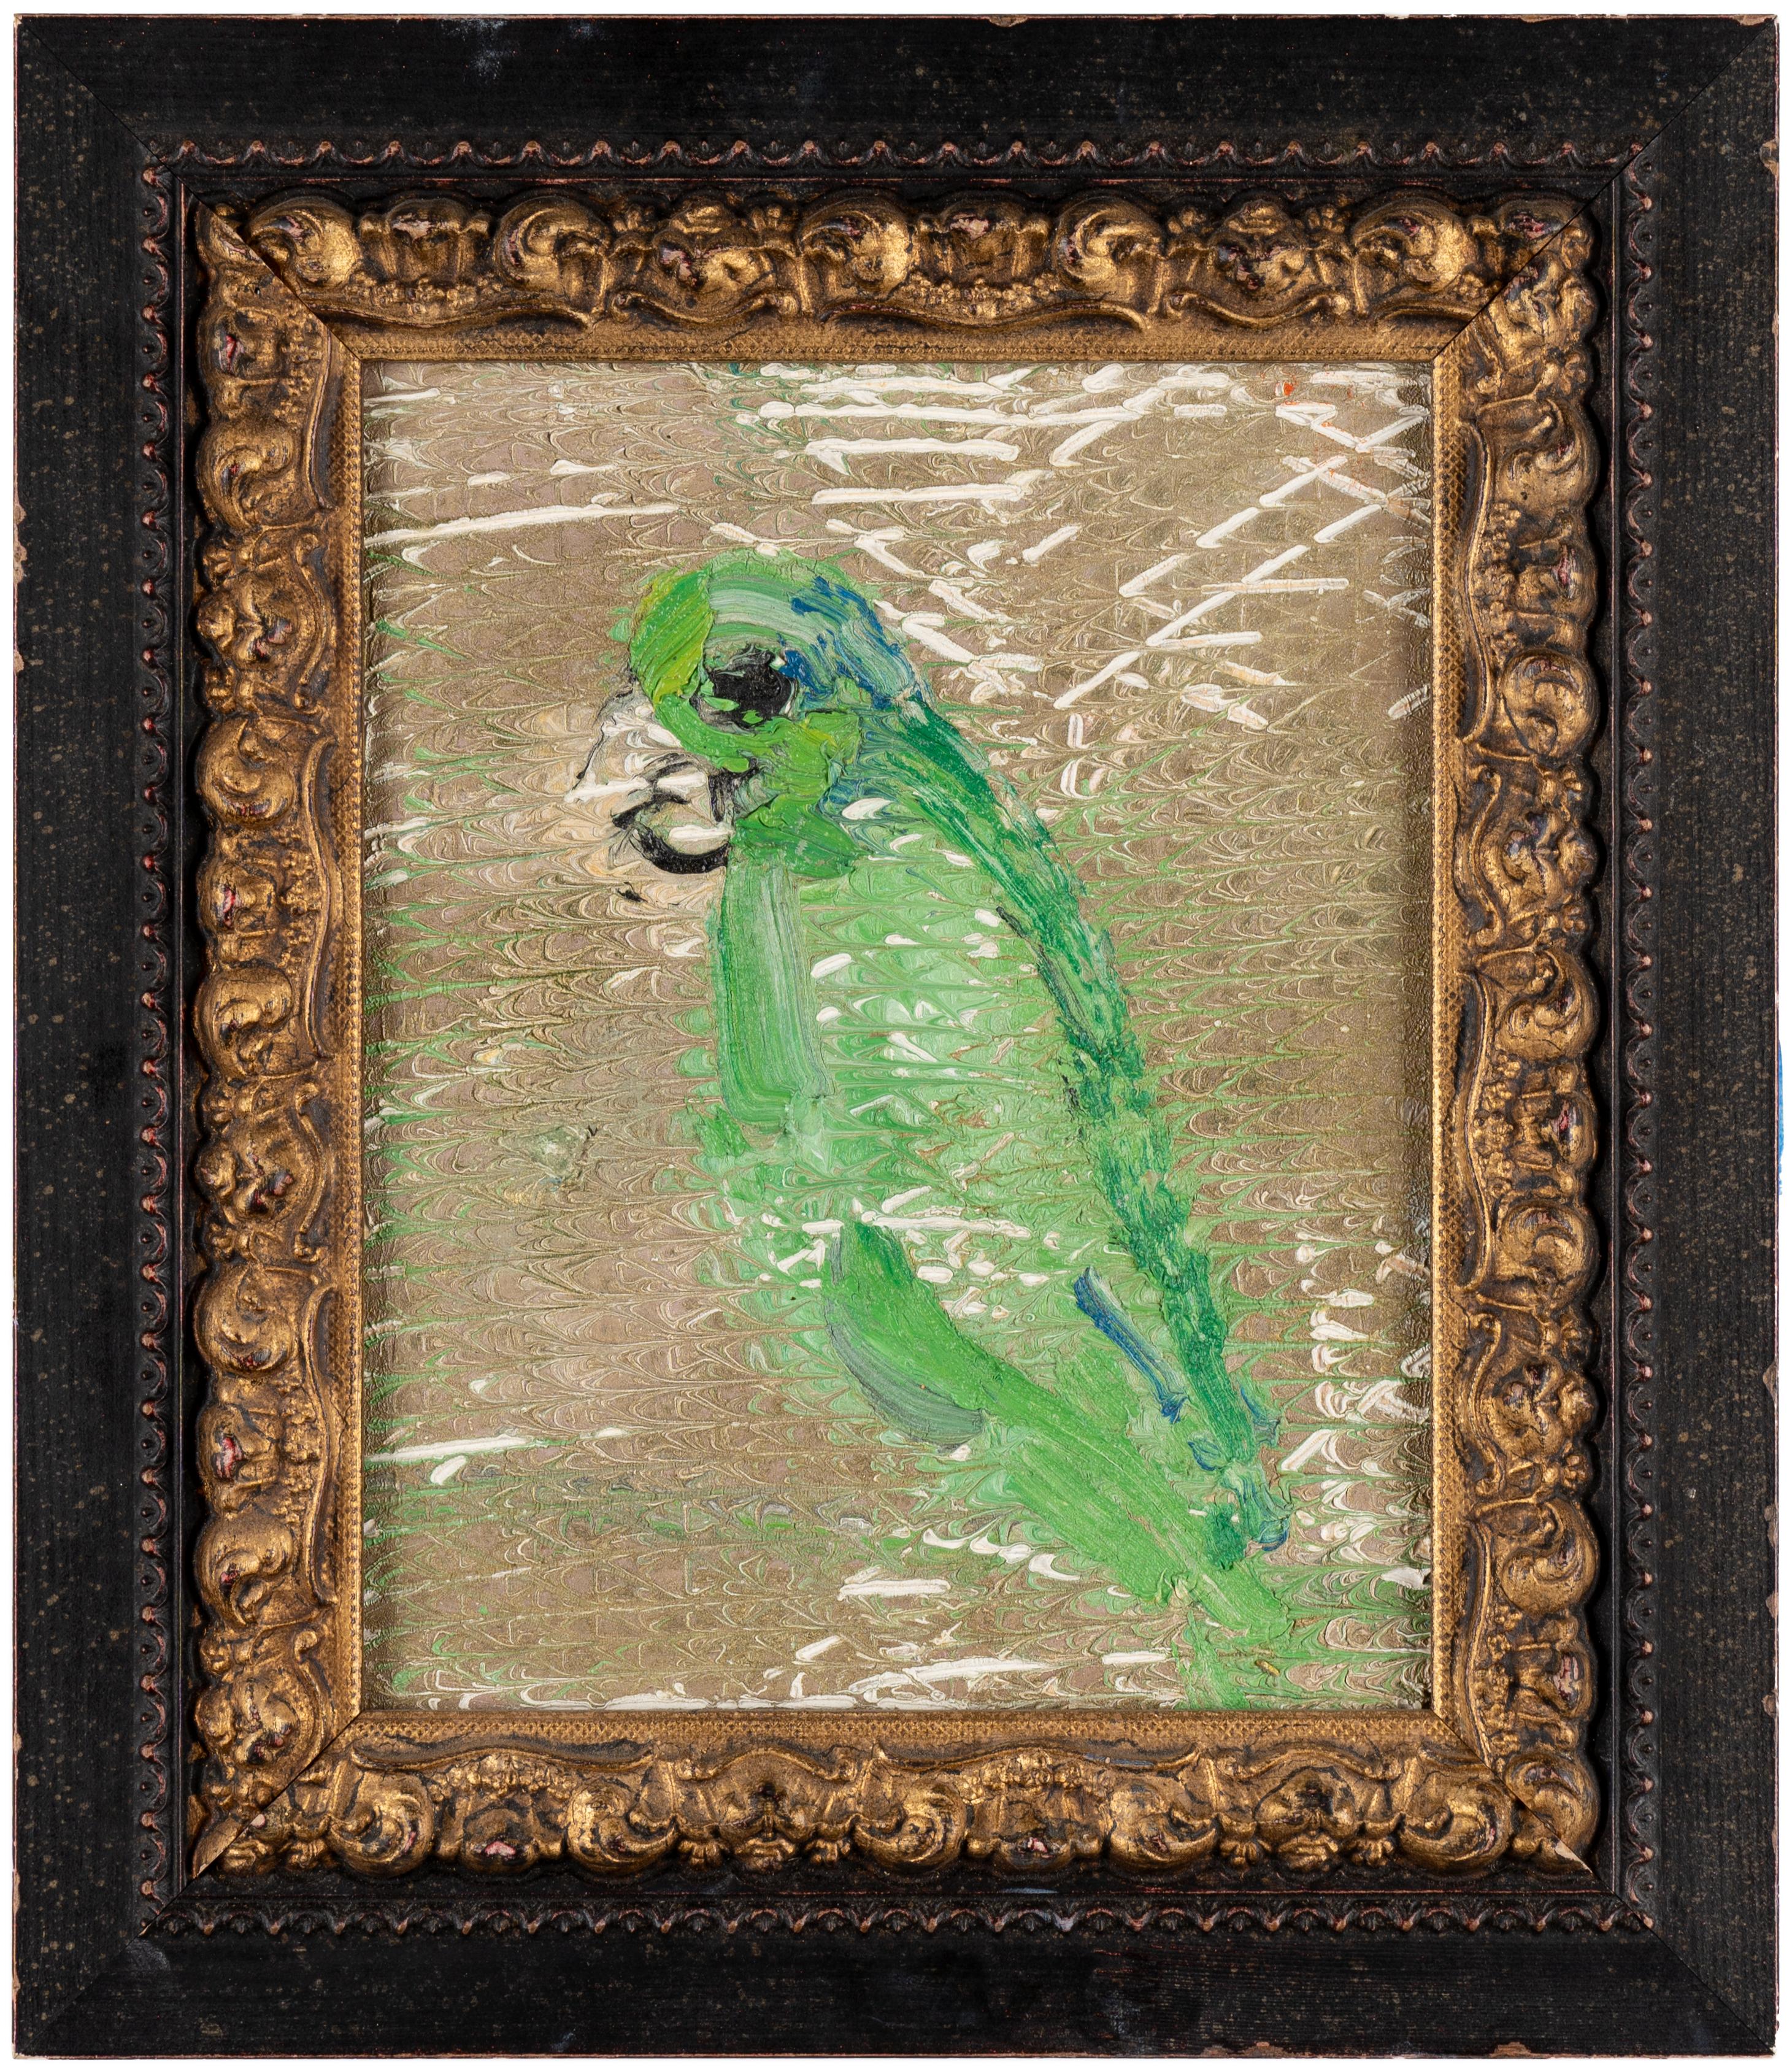 Hunt Slonem "Untitled" Green Amazon Bird on Gold
A painted Green Amazon Bird on a Gold scored metallic background in Hunt Slonem's old style in an antique frame.

Unframed: 10 x 8 inches
Framed: 14.5 x 12.6 inches
*Painting is framed - Please note